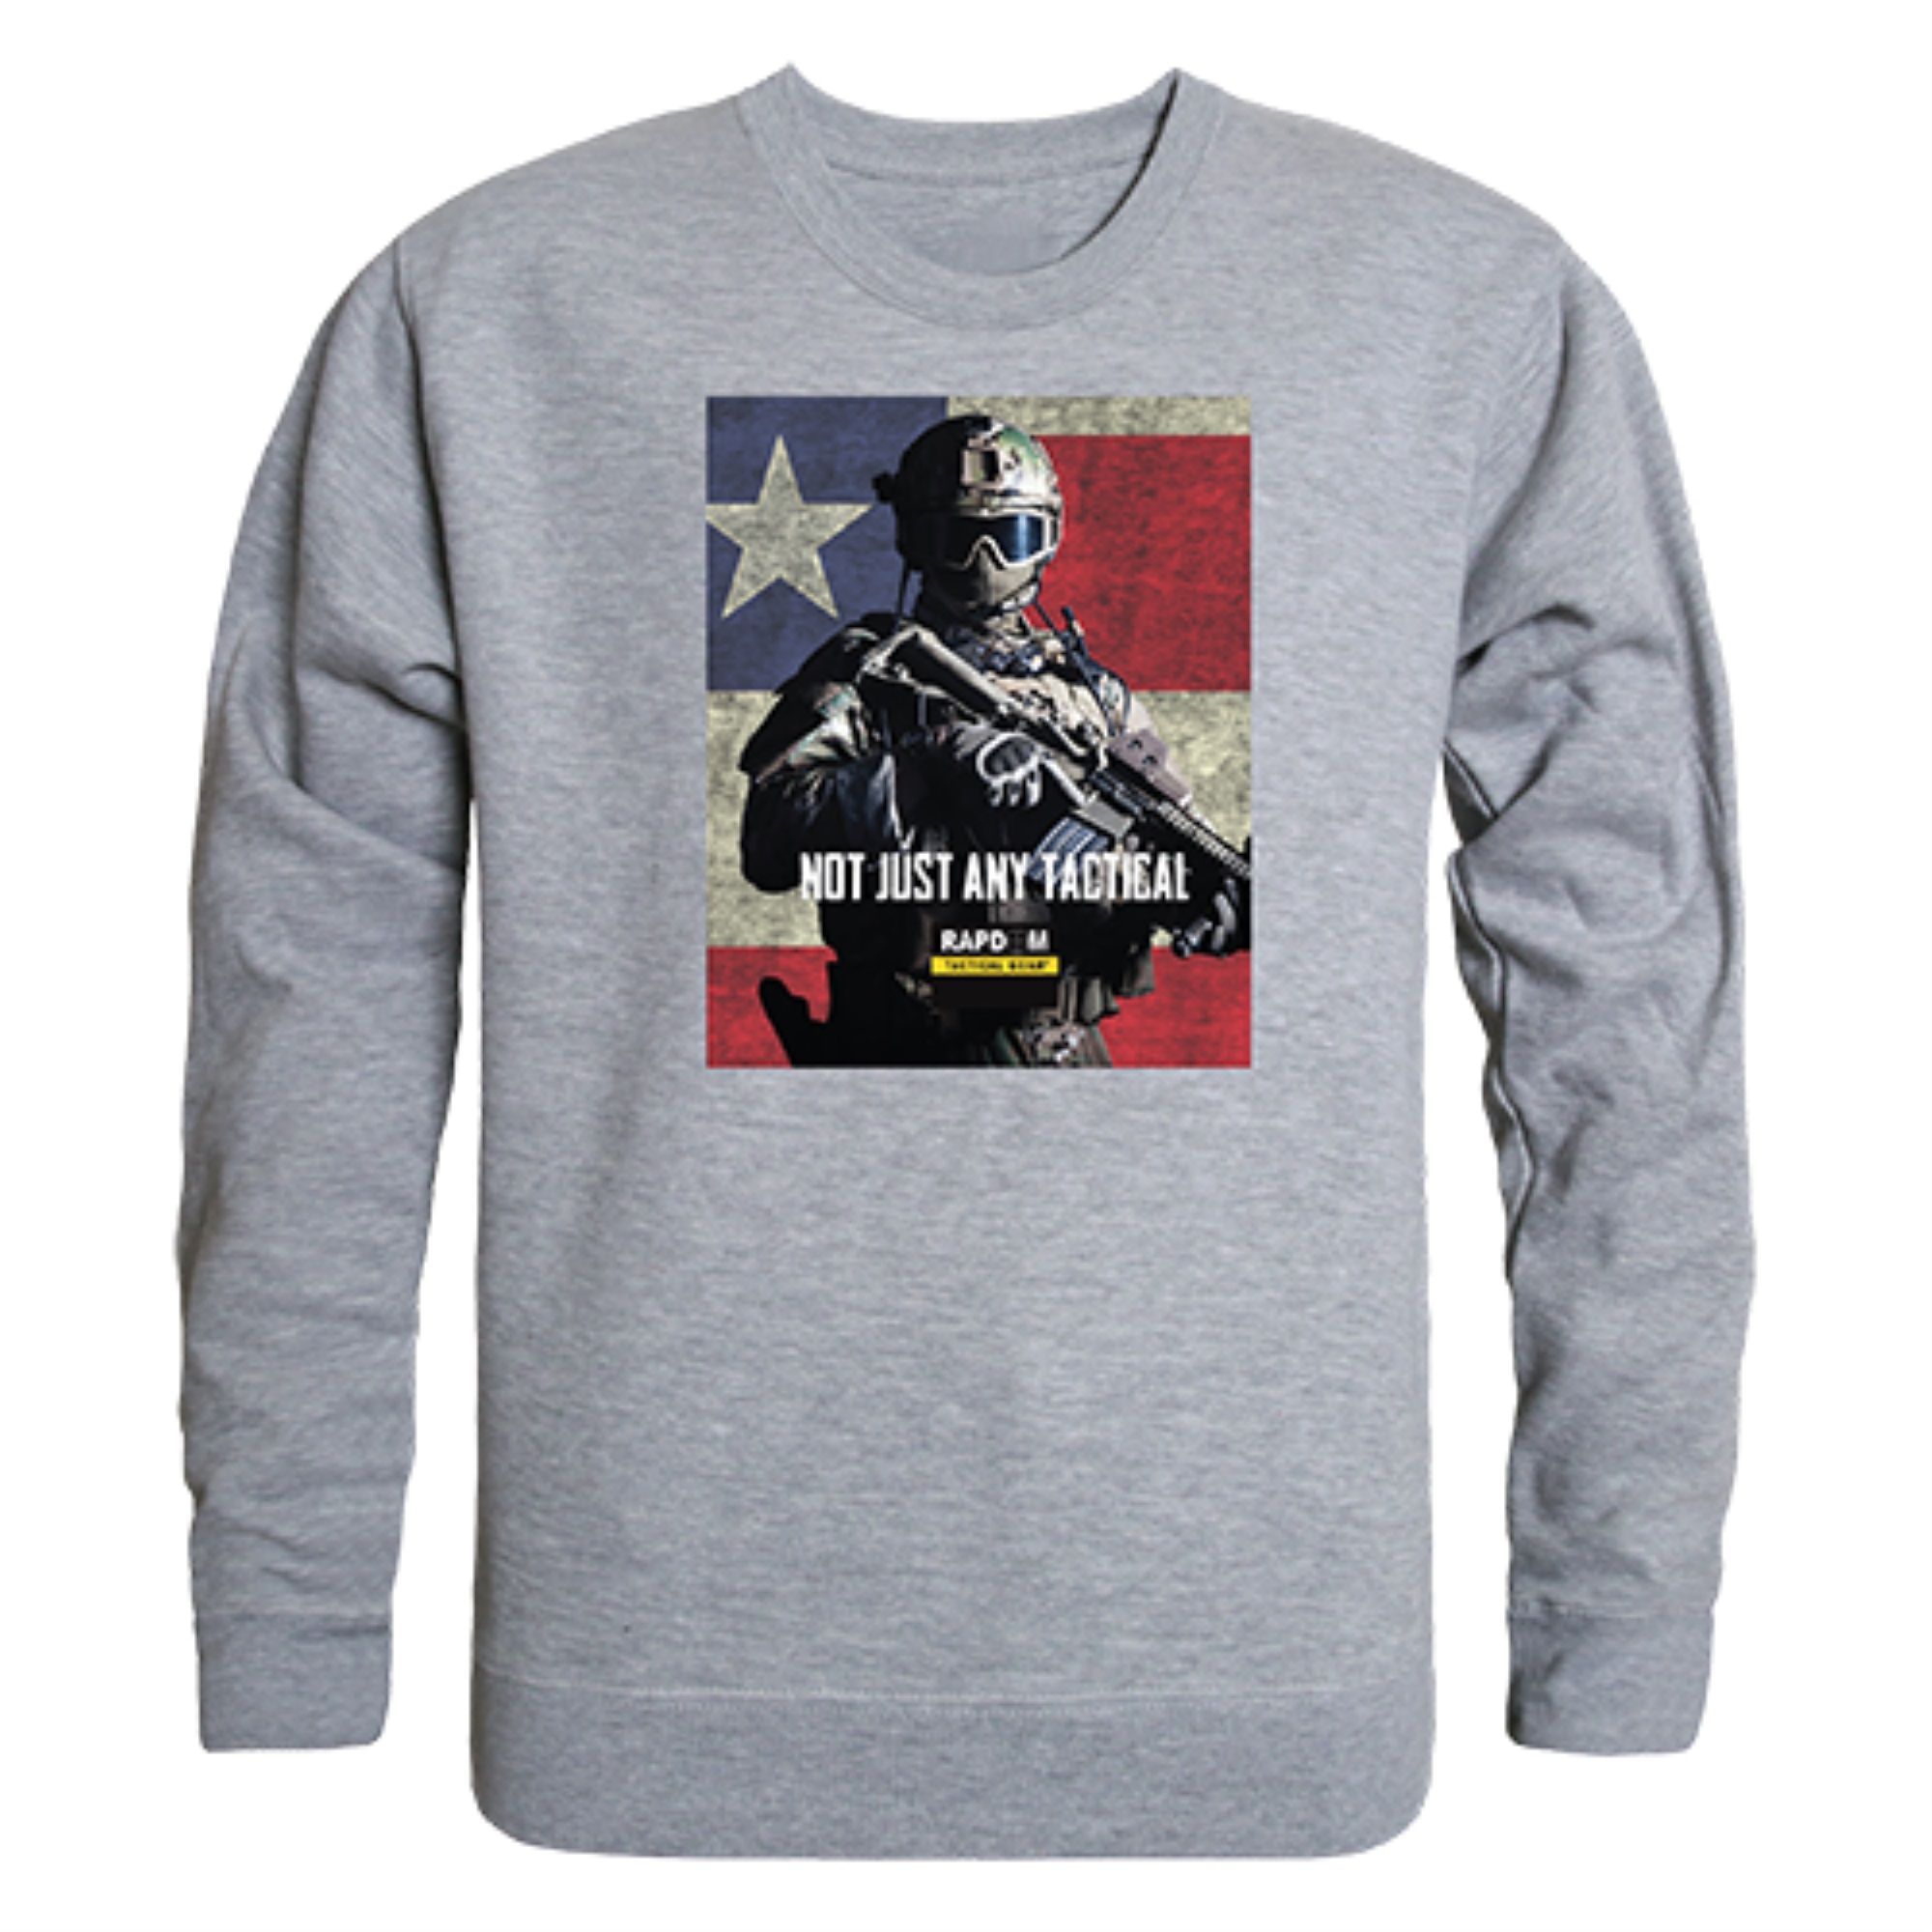 Rapid Dominance Graphic Crewneck, Not Just Any, HGY, L